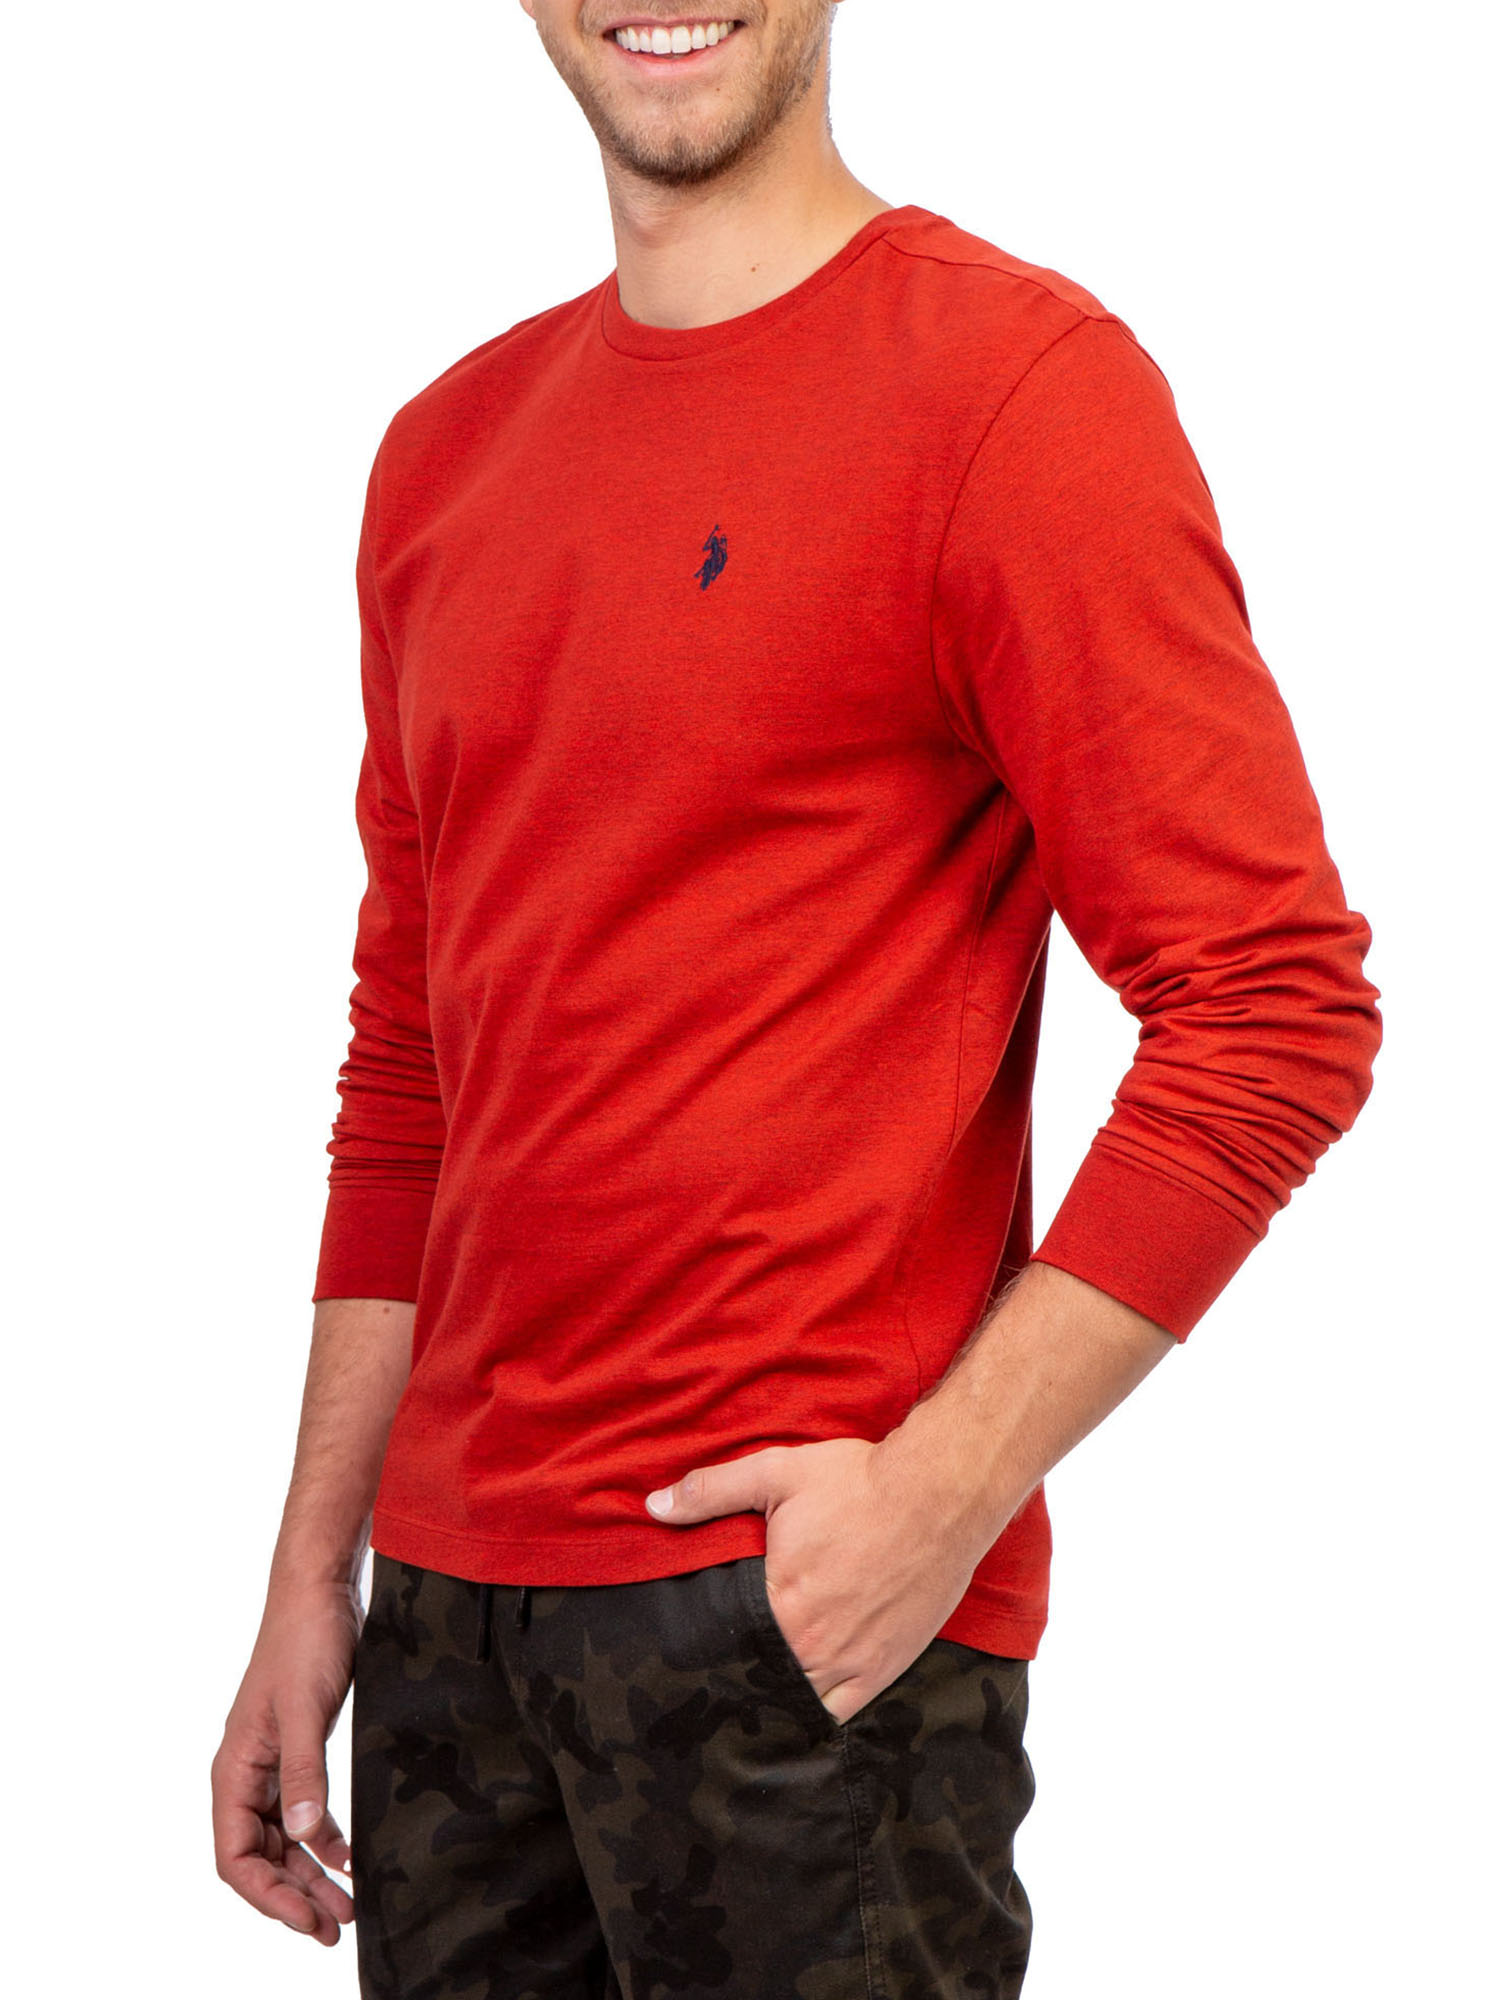 U.S. Polo Assn. Men's Long Sleeve Solid T-Shirt - image 4 of 4